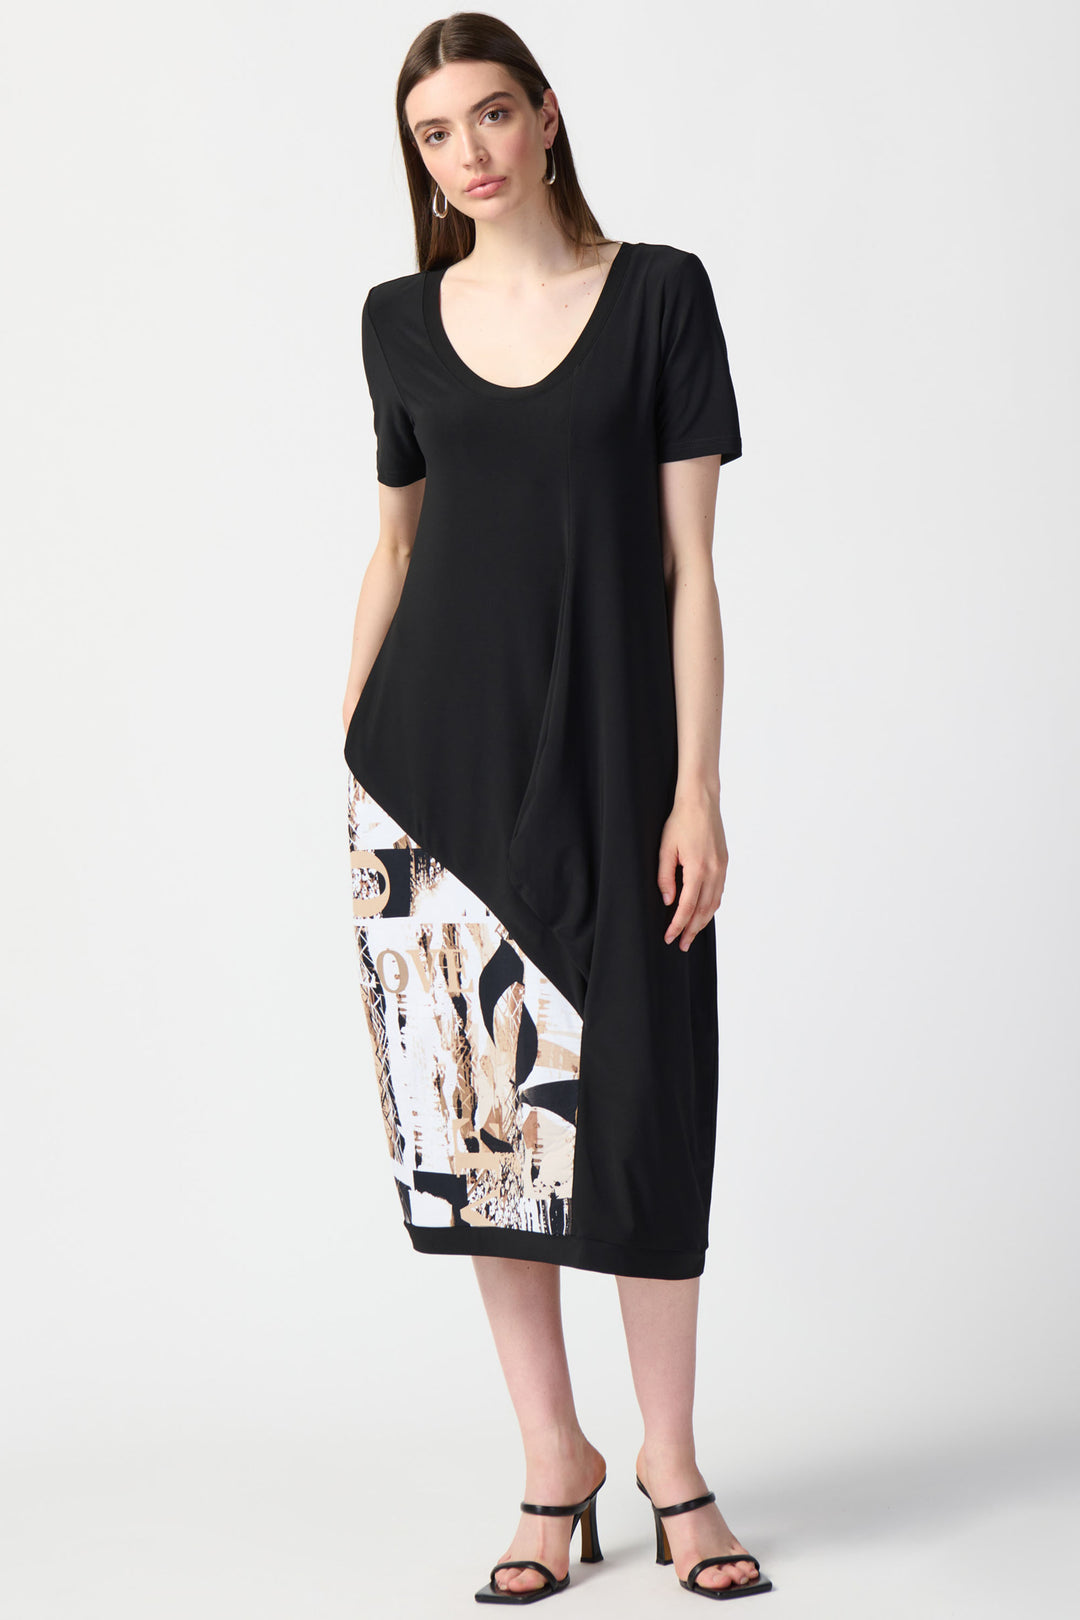 This bold yet simple Cocoon Dress features a relaxed fit, midi-length and round neck design